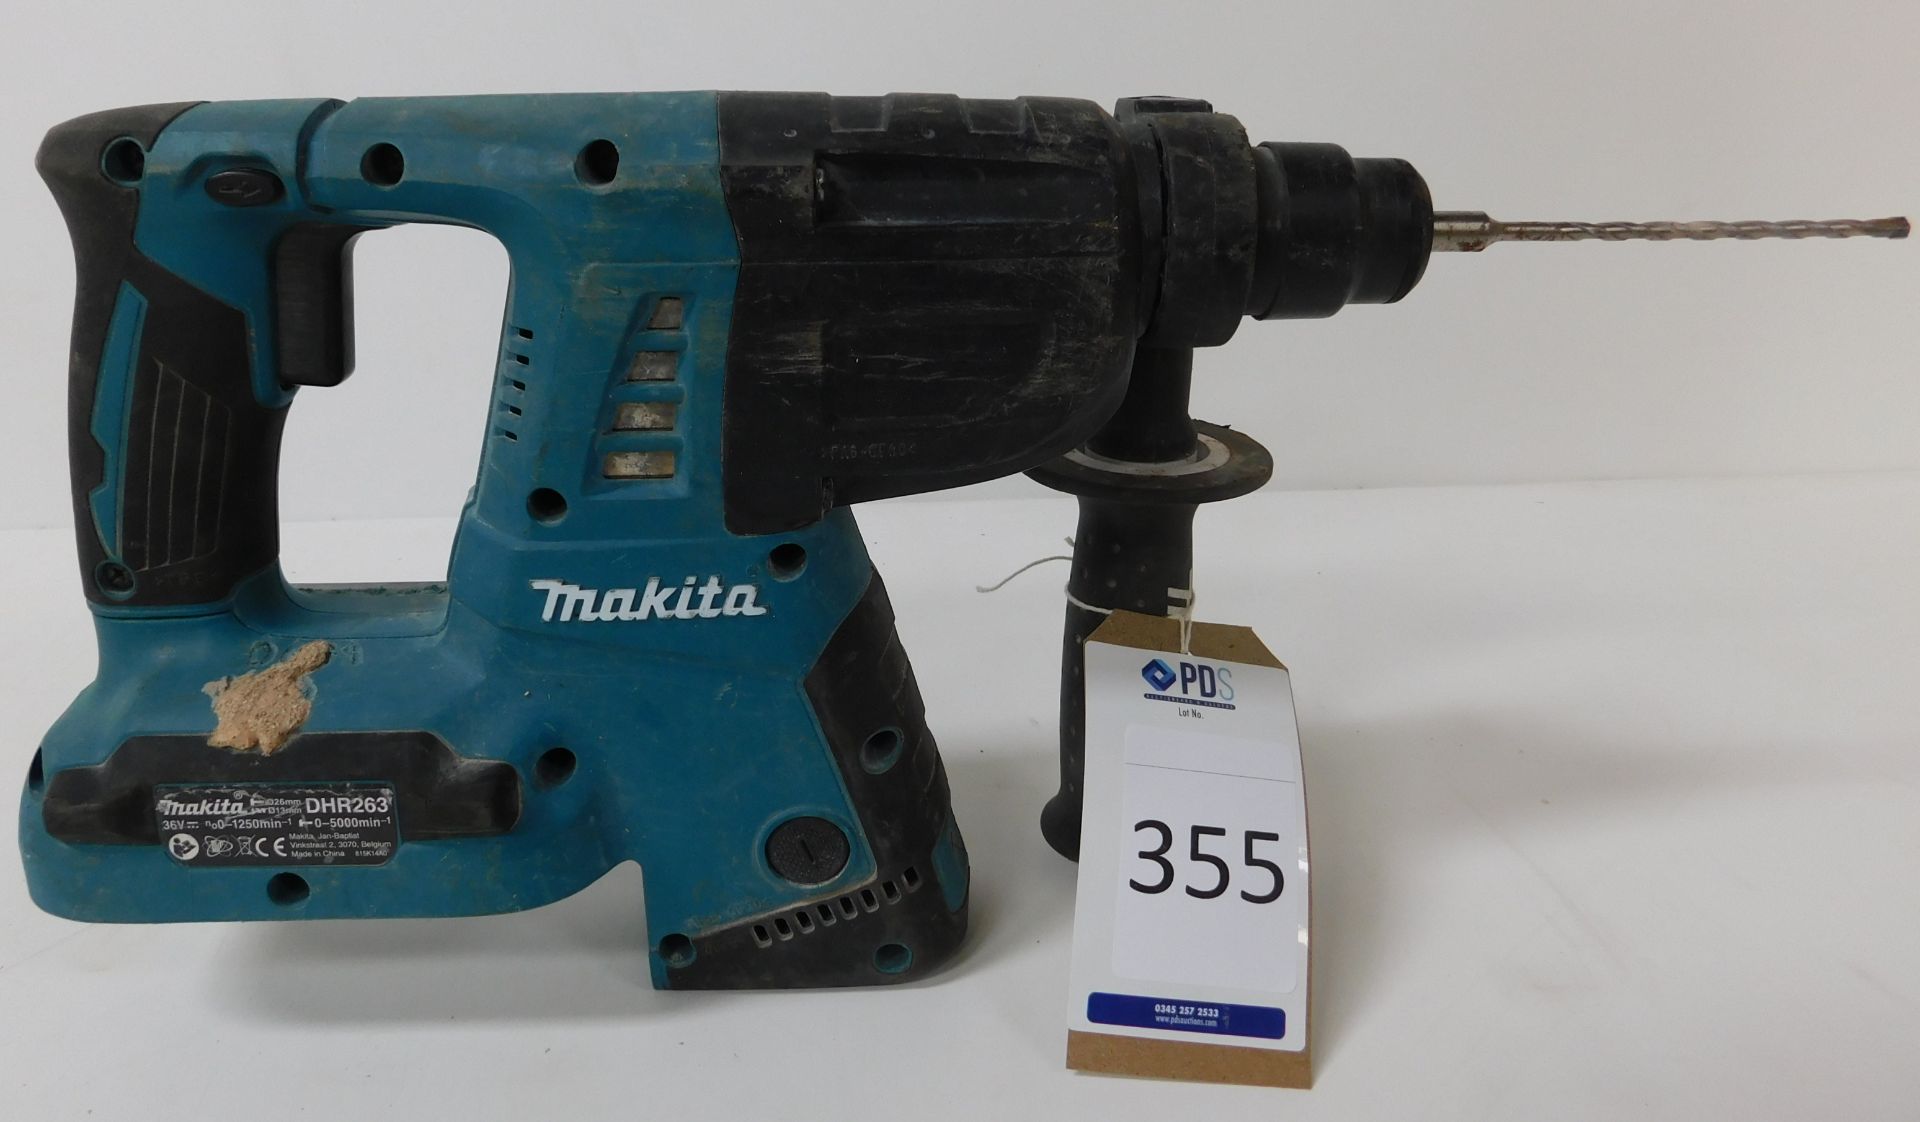 Makita DHR263 Rotary Hammer Drill, 18v (no Battery) (Location: Brentwood - See General Notes for